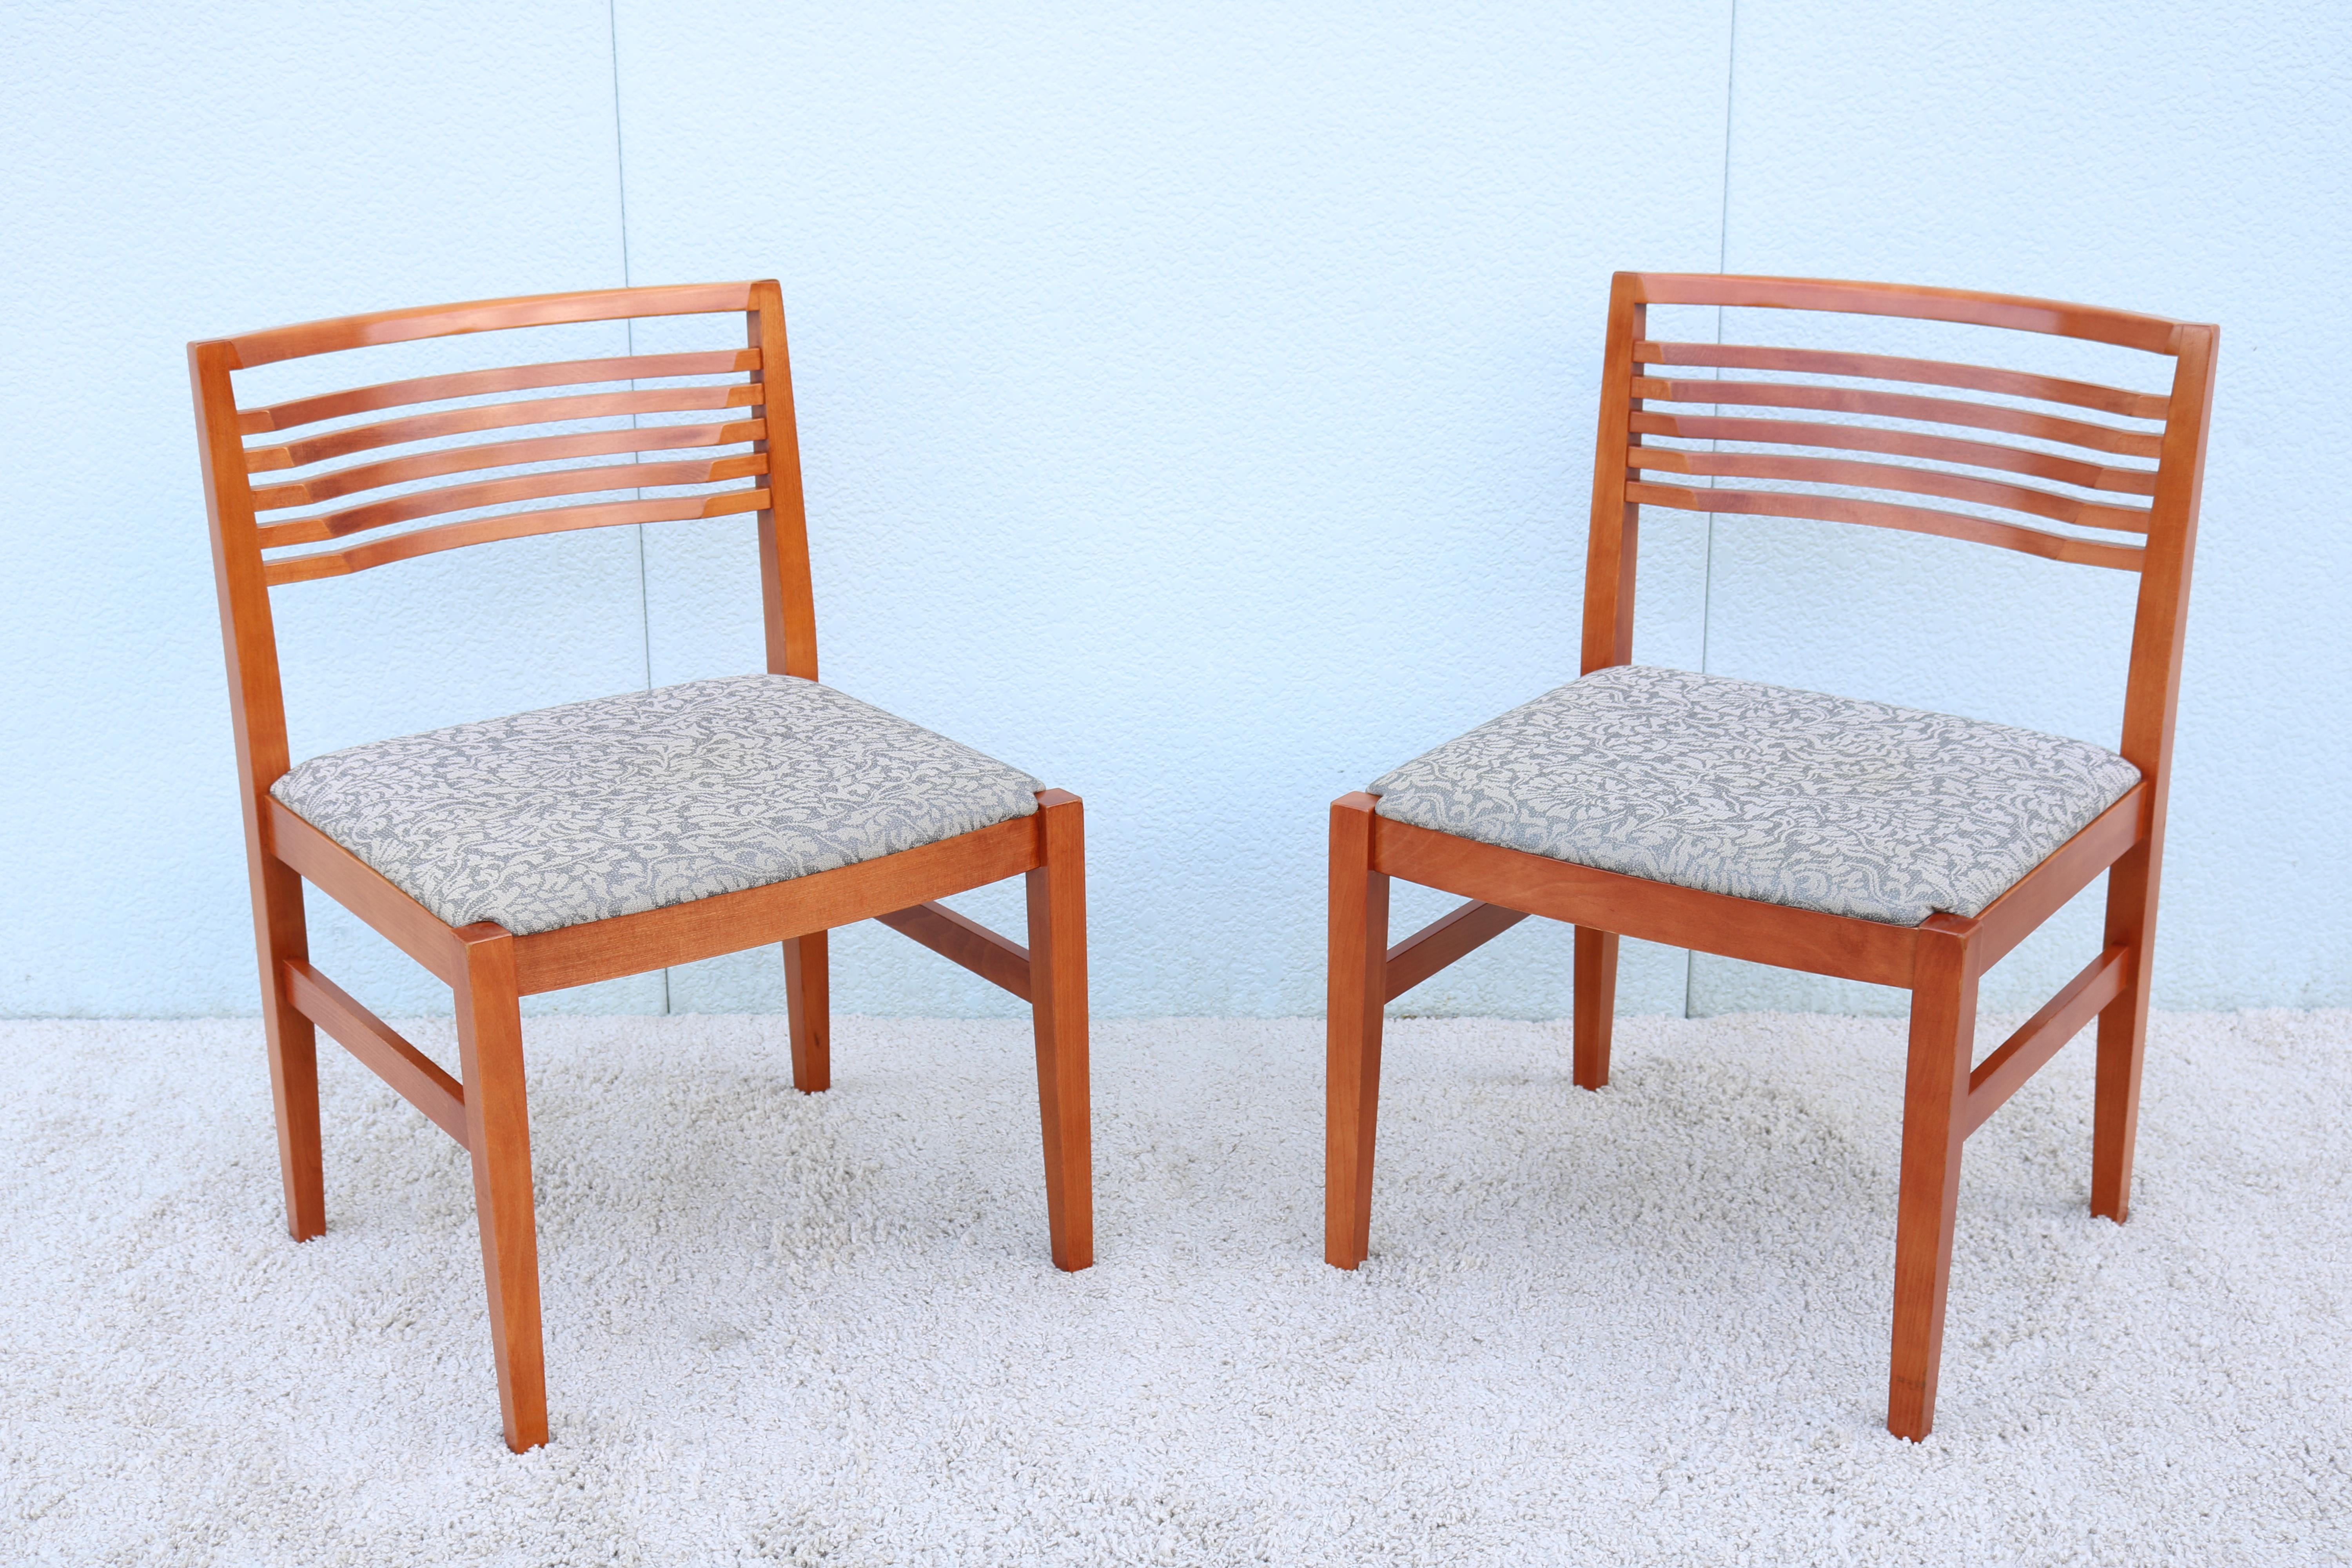 Stunning pair of authentic and signed Ricchio armless chairs by Knoll Studio. 
These chairs won a Roscoe design award in 1991 for Linda and Joe Ricchio.
They go well in home, dining room, reception areas and private